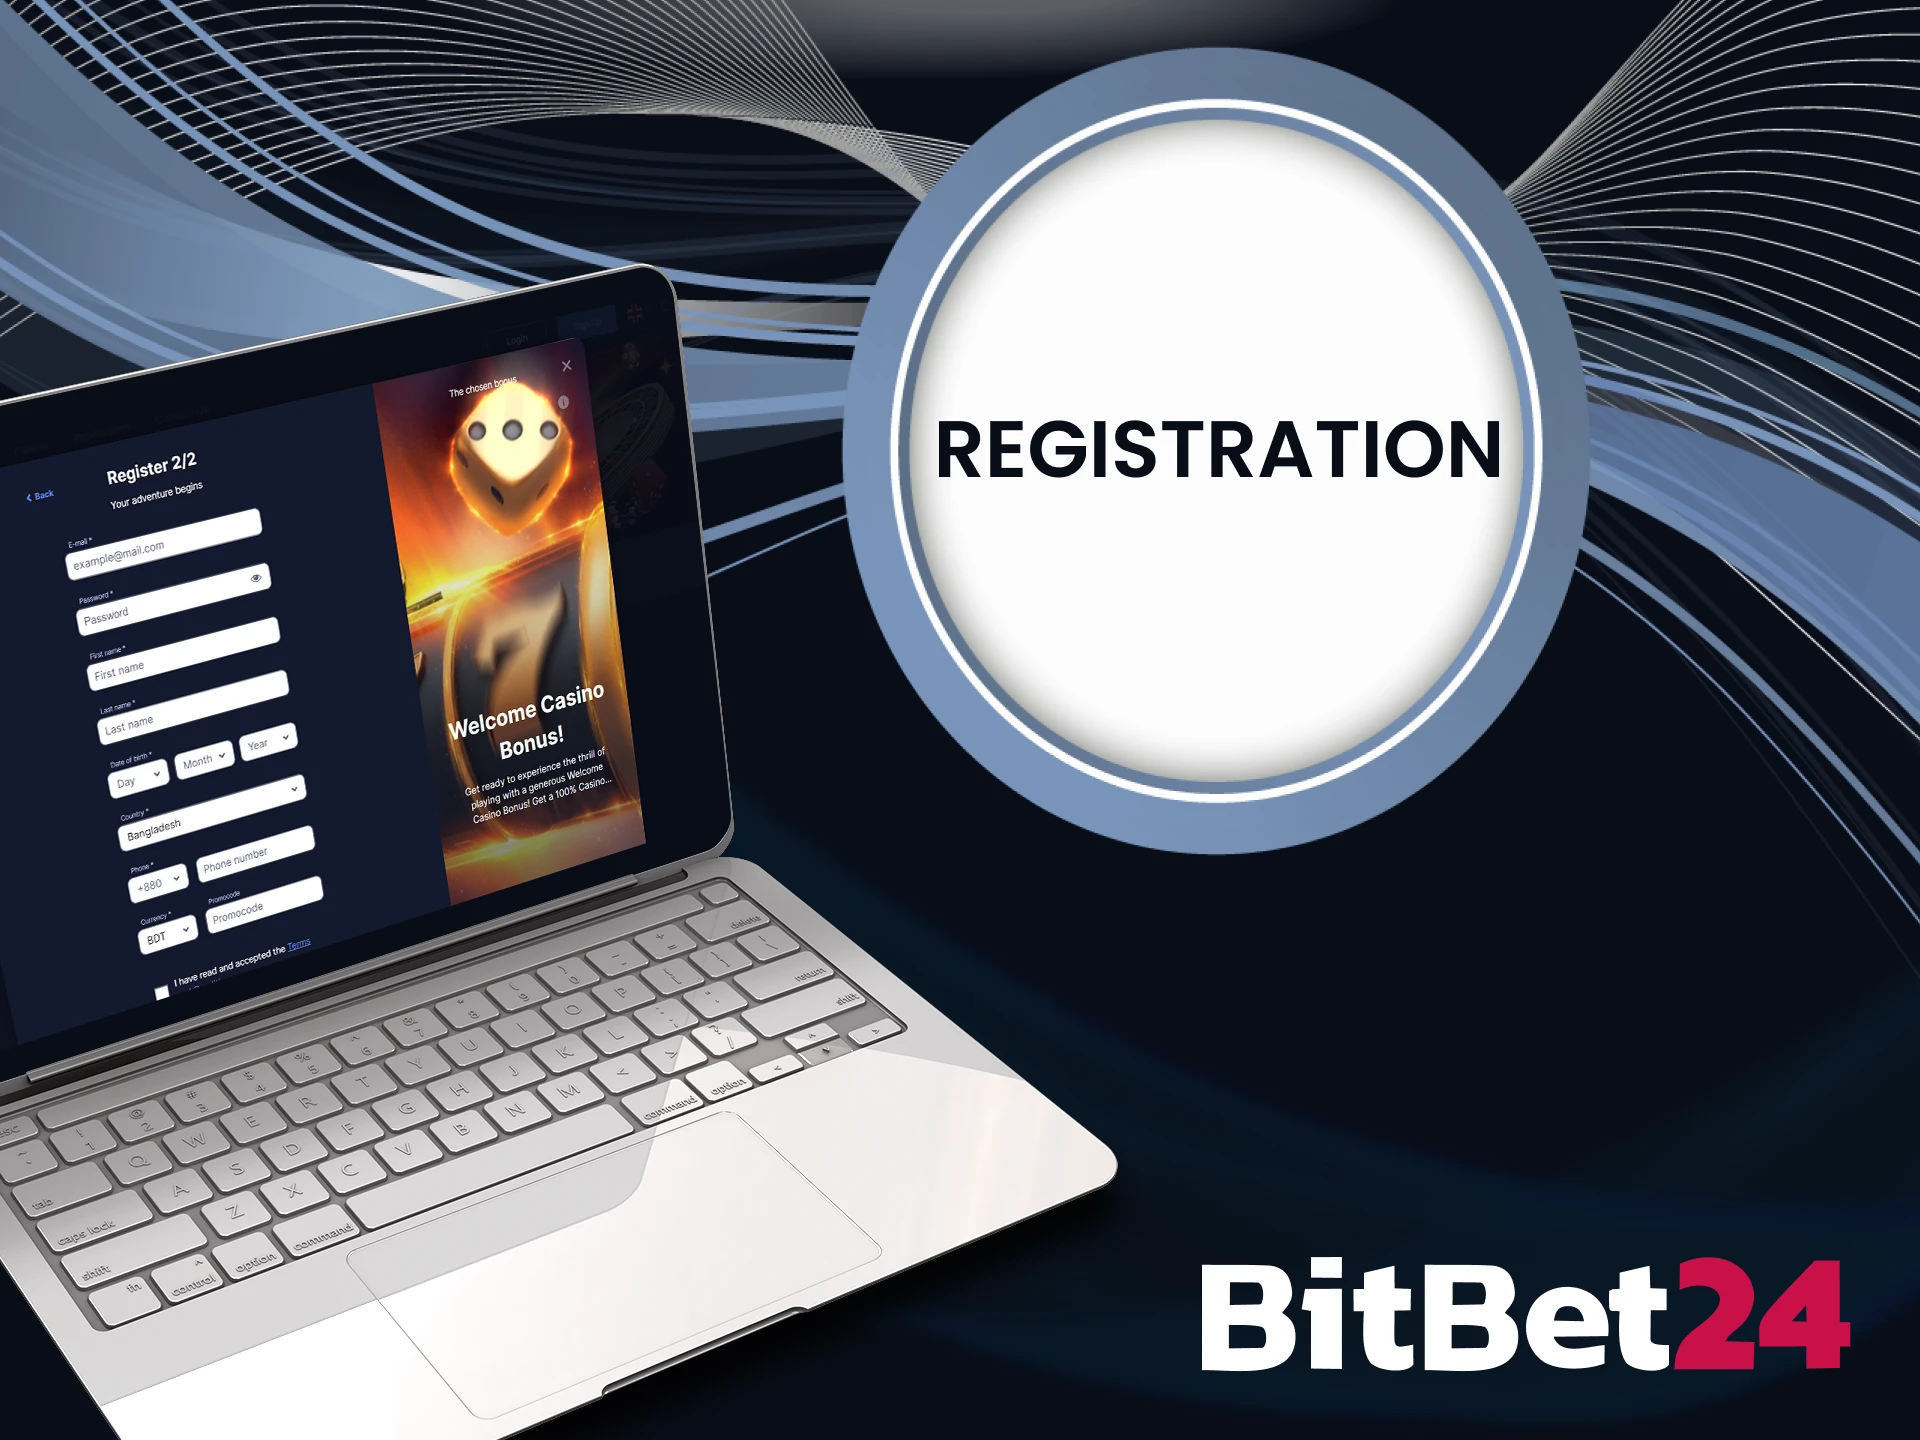 Go through a simple registration process at BitBet24.